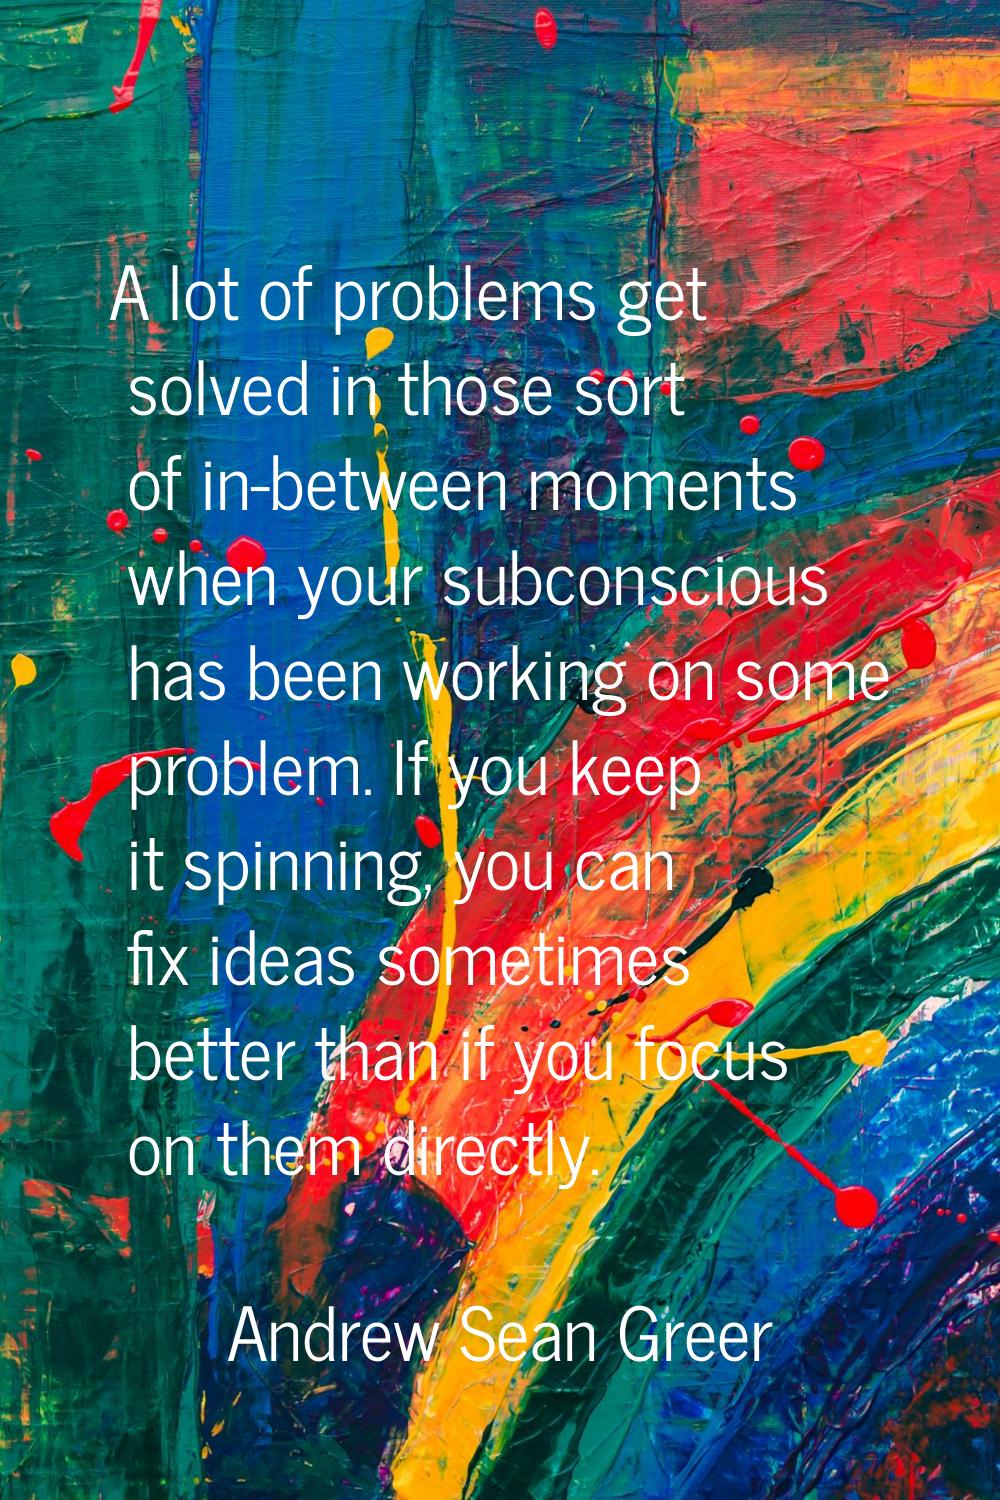 A lot of problems get solved in those sort of in-between moments when your subconscious has been wo